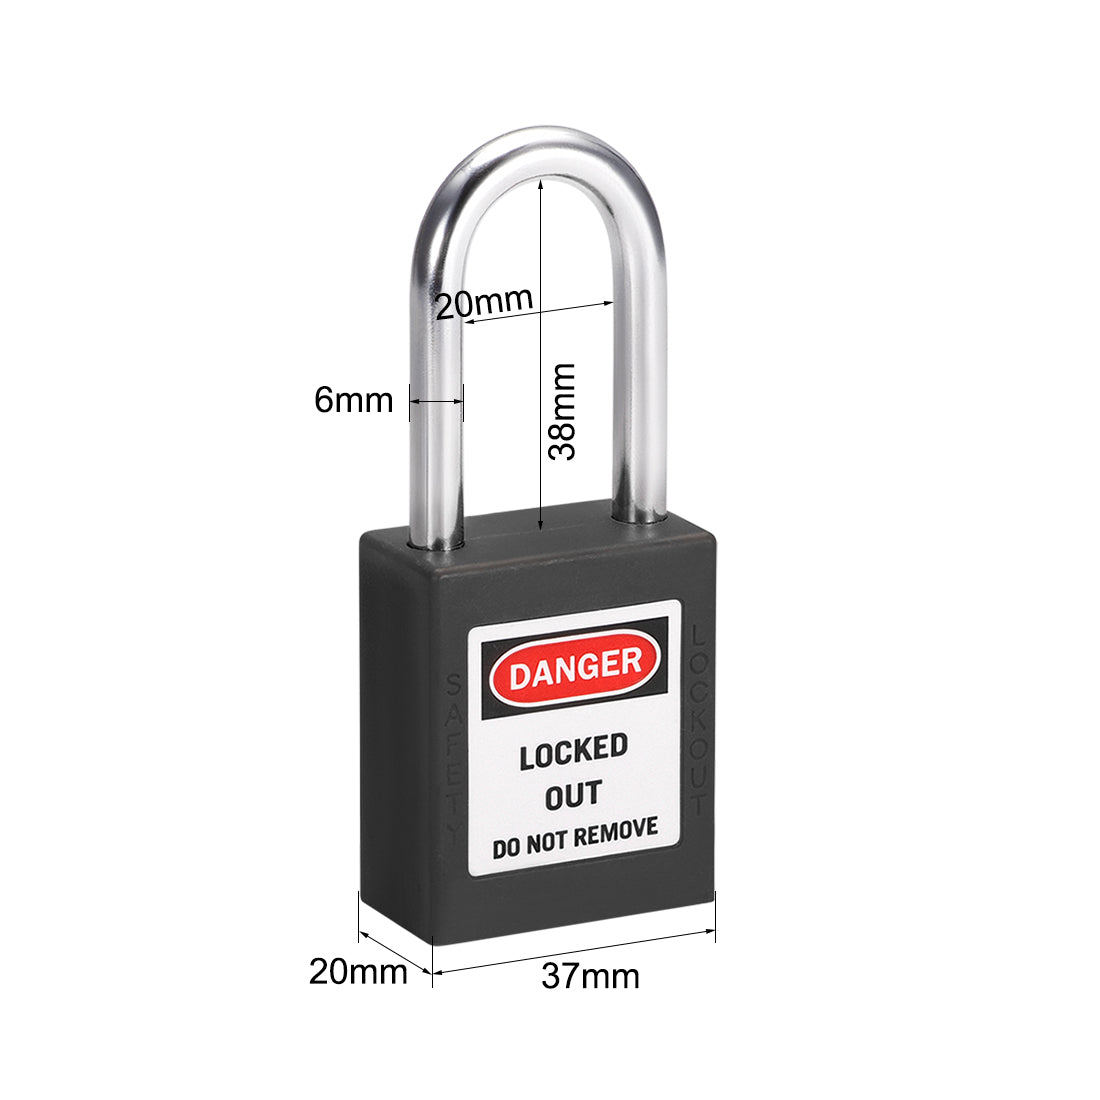 uxcell Uxcell Lockout Tagout Safety Padlock 38mm Steel Shackle Keyed Different Black